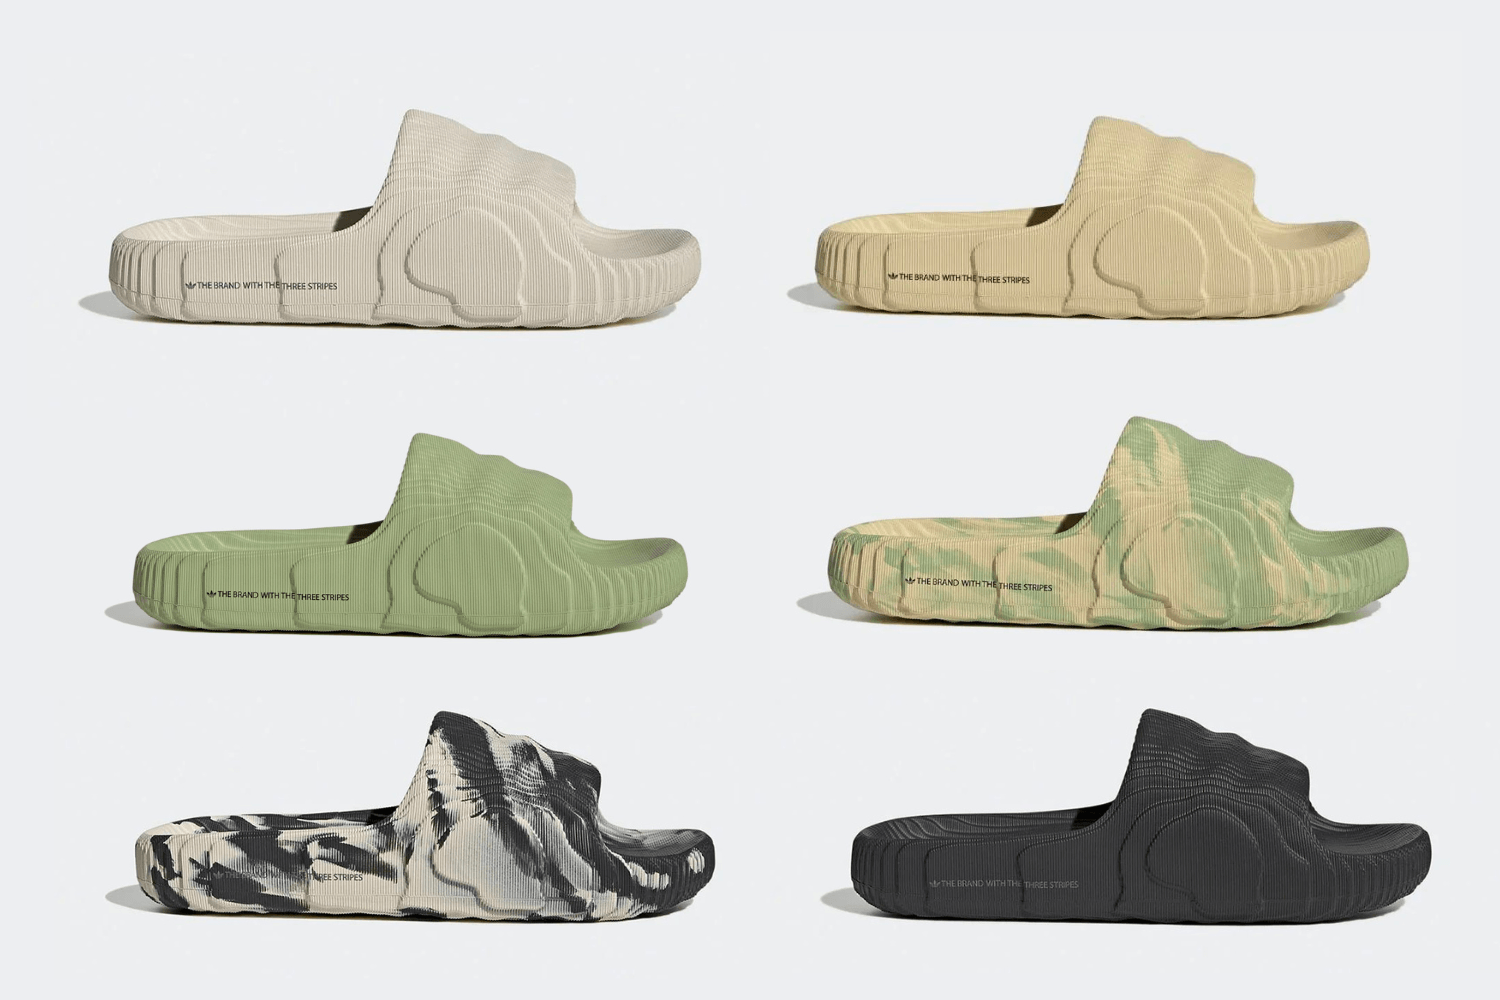 The adidas Adilette 2022 receives new colorways